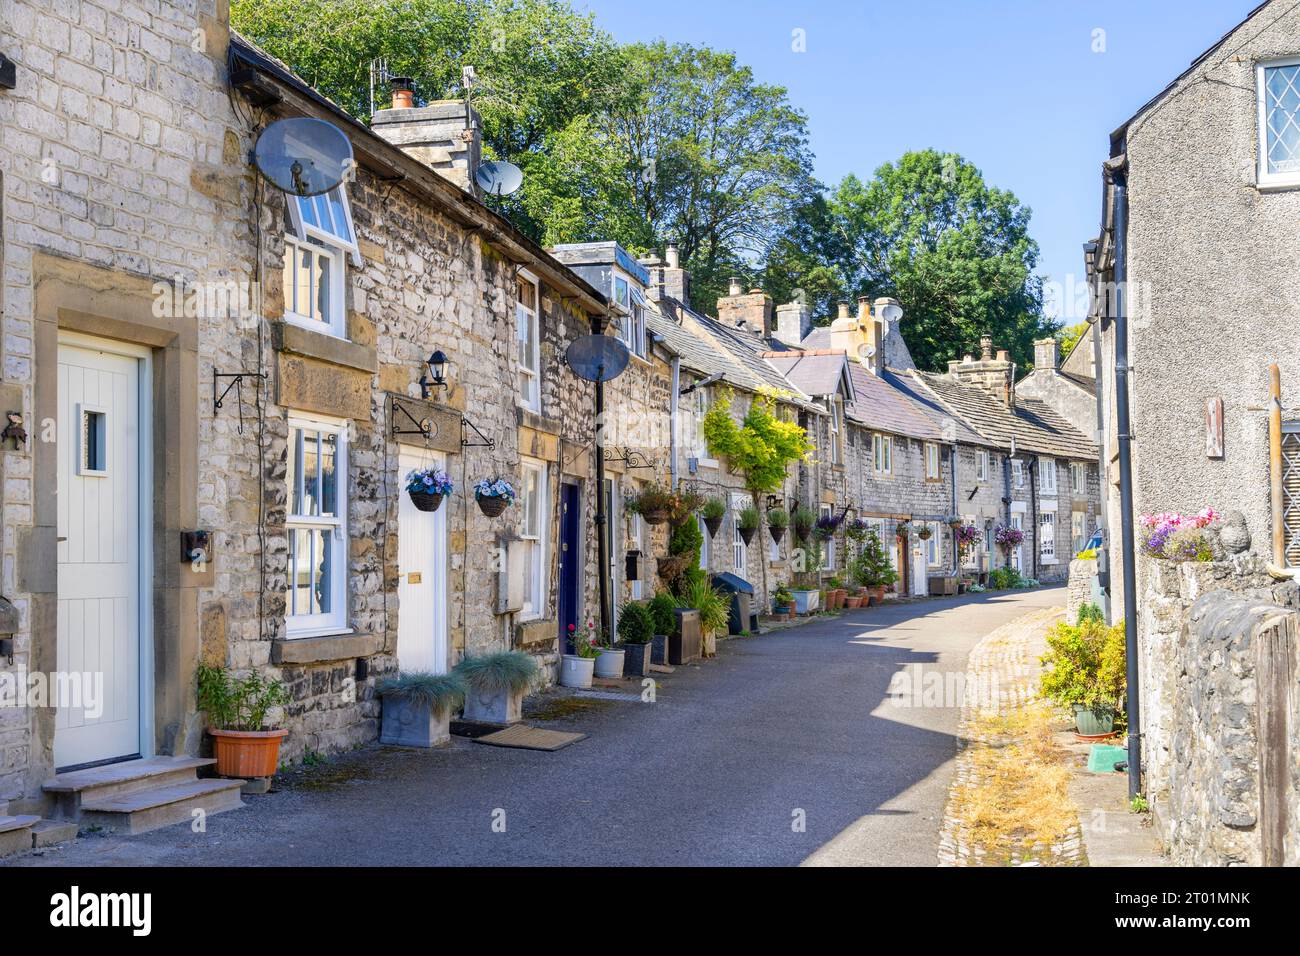 Tideswell Stone built cottages on Fountain Square in Tideswell Derbyshire Dales Derbyshire Peak District national Park Derbyshire England UK GB Europe Stock Photo